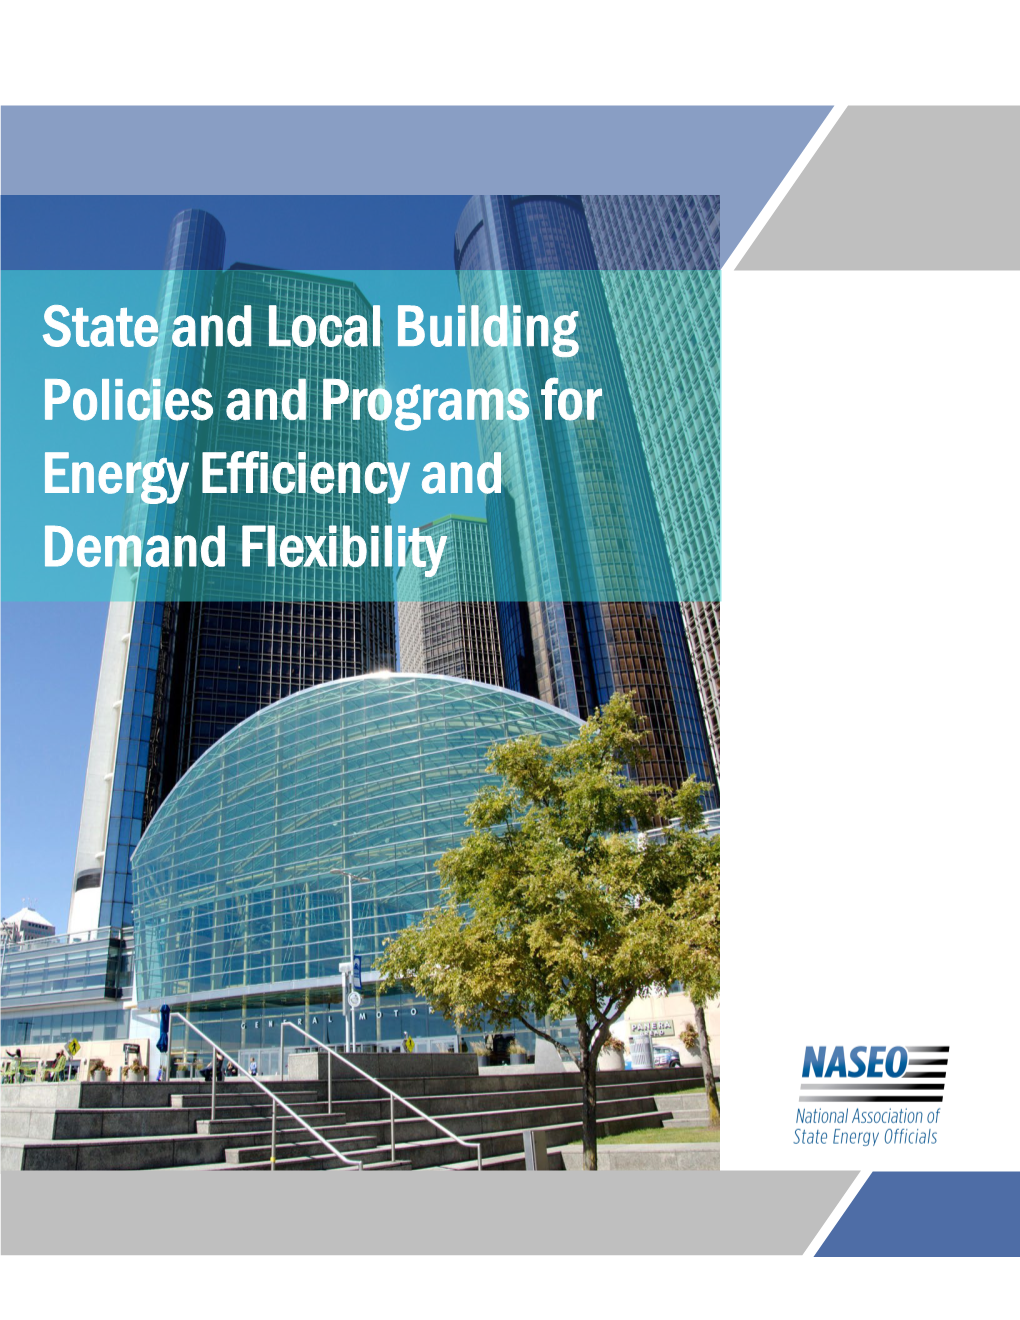 State and Local Building Policies and Programs for Energy Efficiency and Demand Flexibility